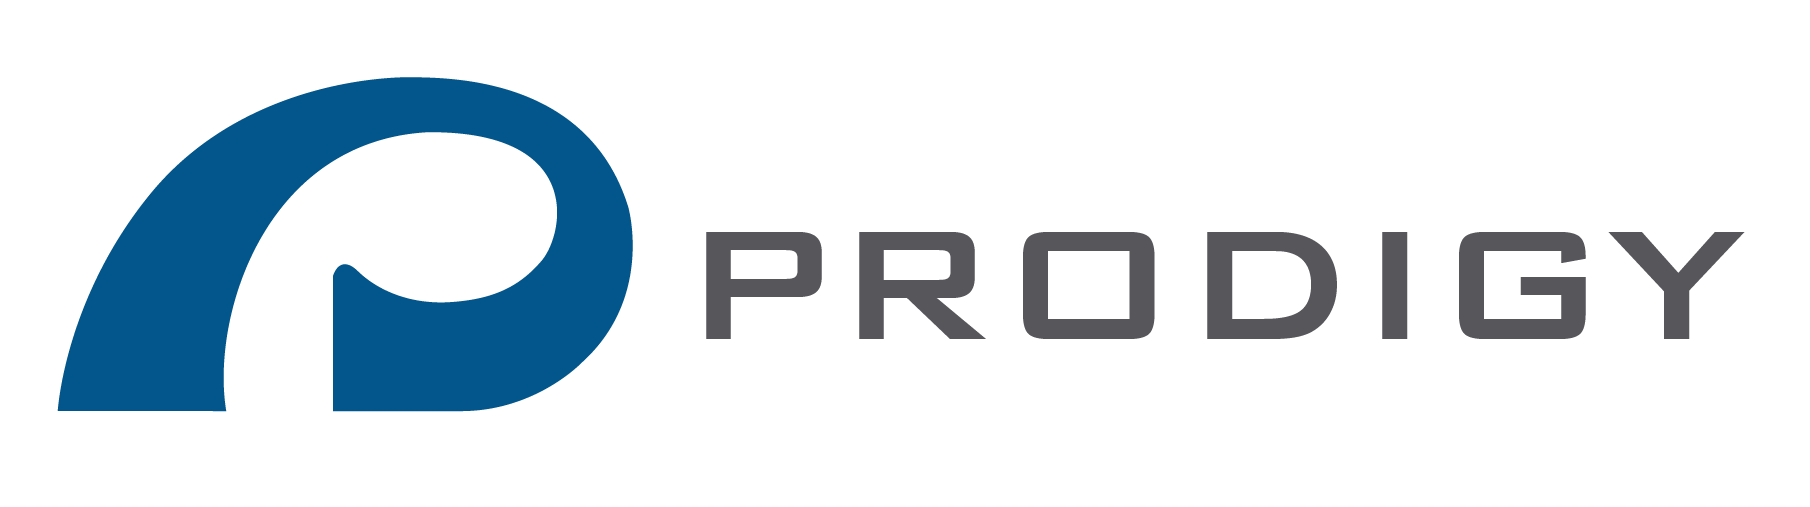 Prodigy Logo - Prodigy. Solutions. Consulting. Management